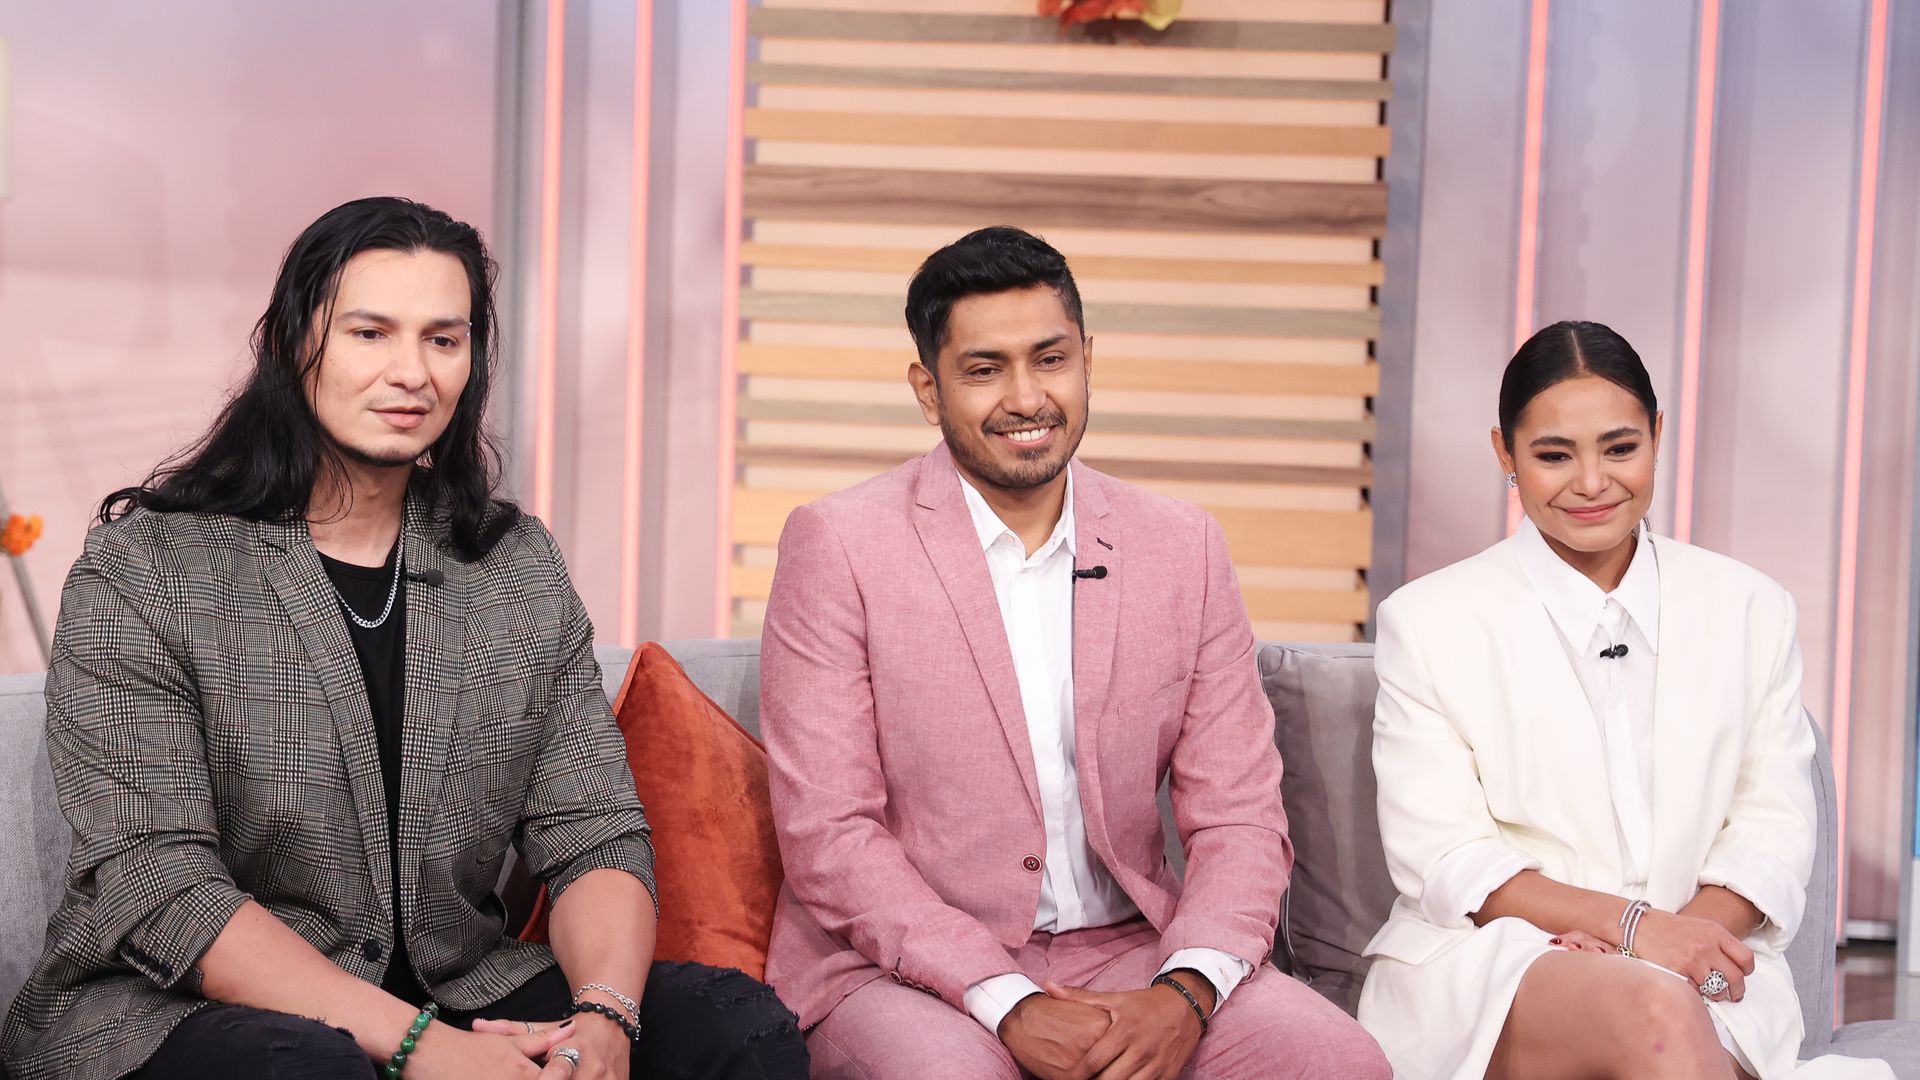 Alex Livinalli, Tenoch Huerta and Mabel Cadena sit on a sofa, smiling while looking down, while at "Despierta America" at Univision Studios to promote Wakanda Forever 